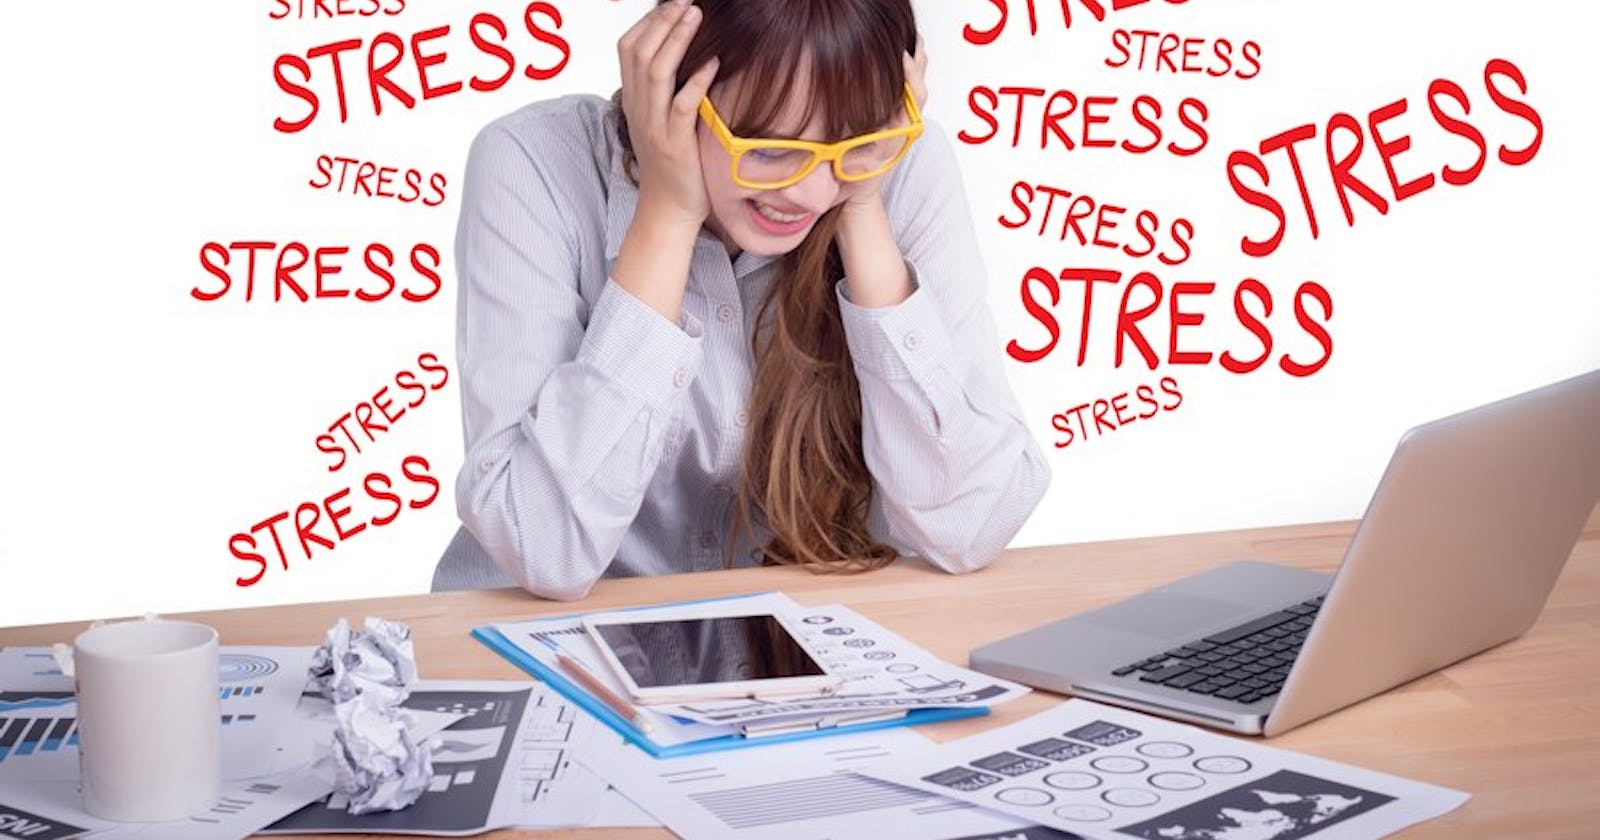 Coping with daily life stress as a developer